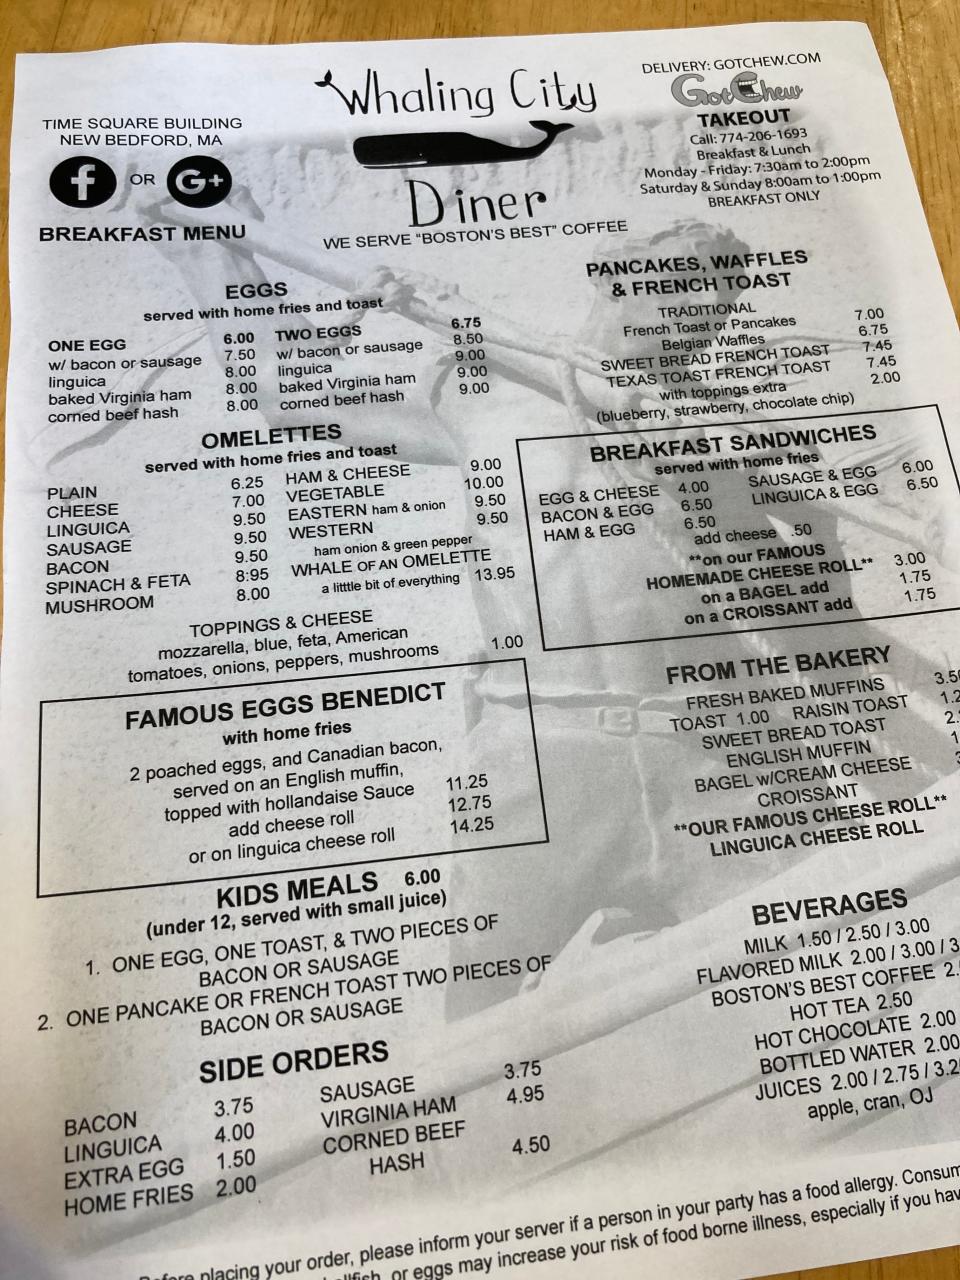 The Whaling City Diner menu serves up breakfast and lunch.